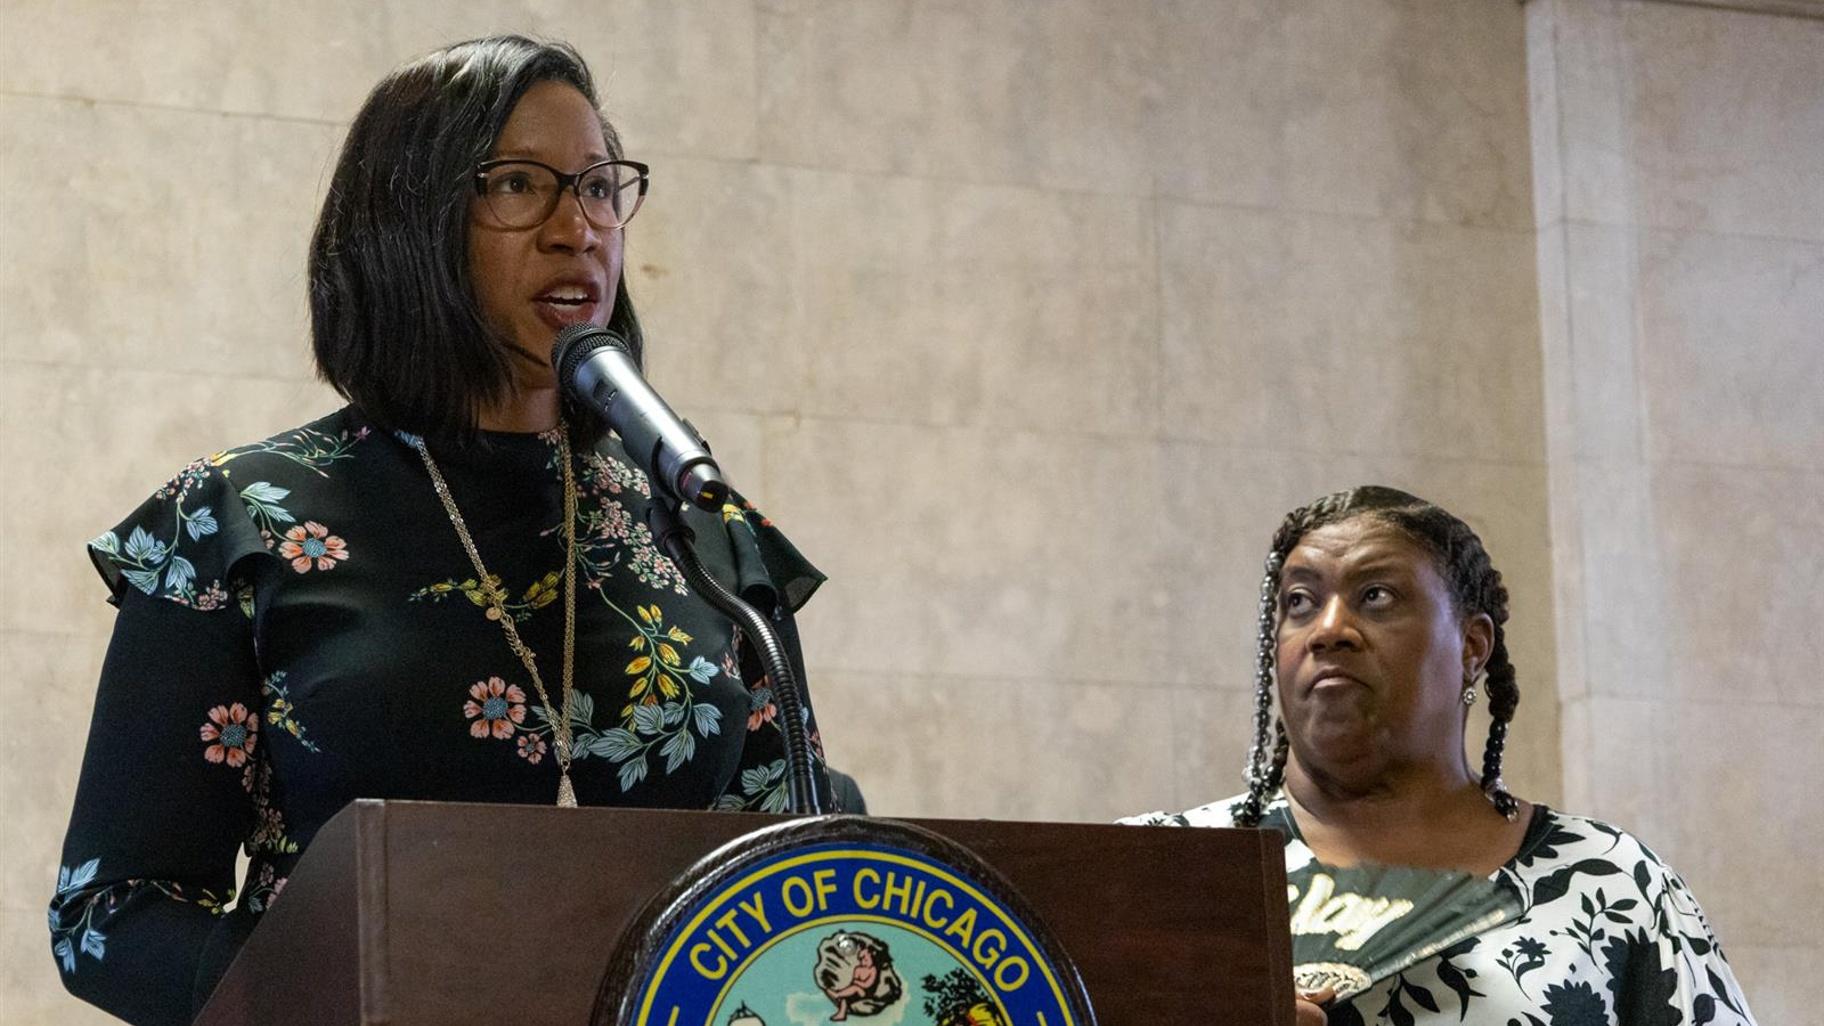 Chicago City Treasurer Melissa Conyears-Ervin calls for a reduction to a requested utility rate increase by Peoples Gas at a June 1, 2023, news conference. Rosazlia Grillier, a resident of West Englewood and advocate for low-income families, is also pictured. (Andrew Adams / Capitol News Illinois)